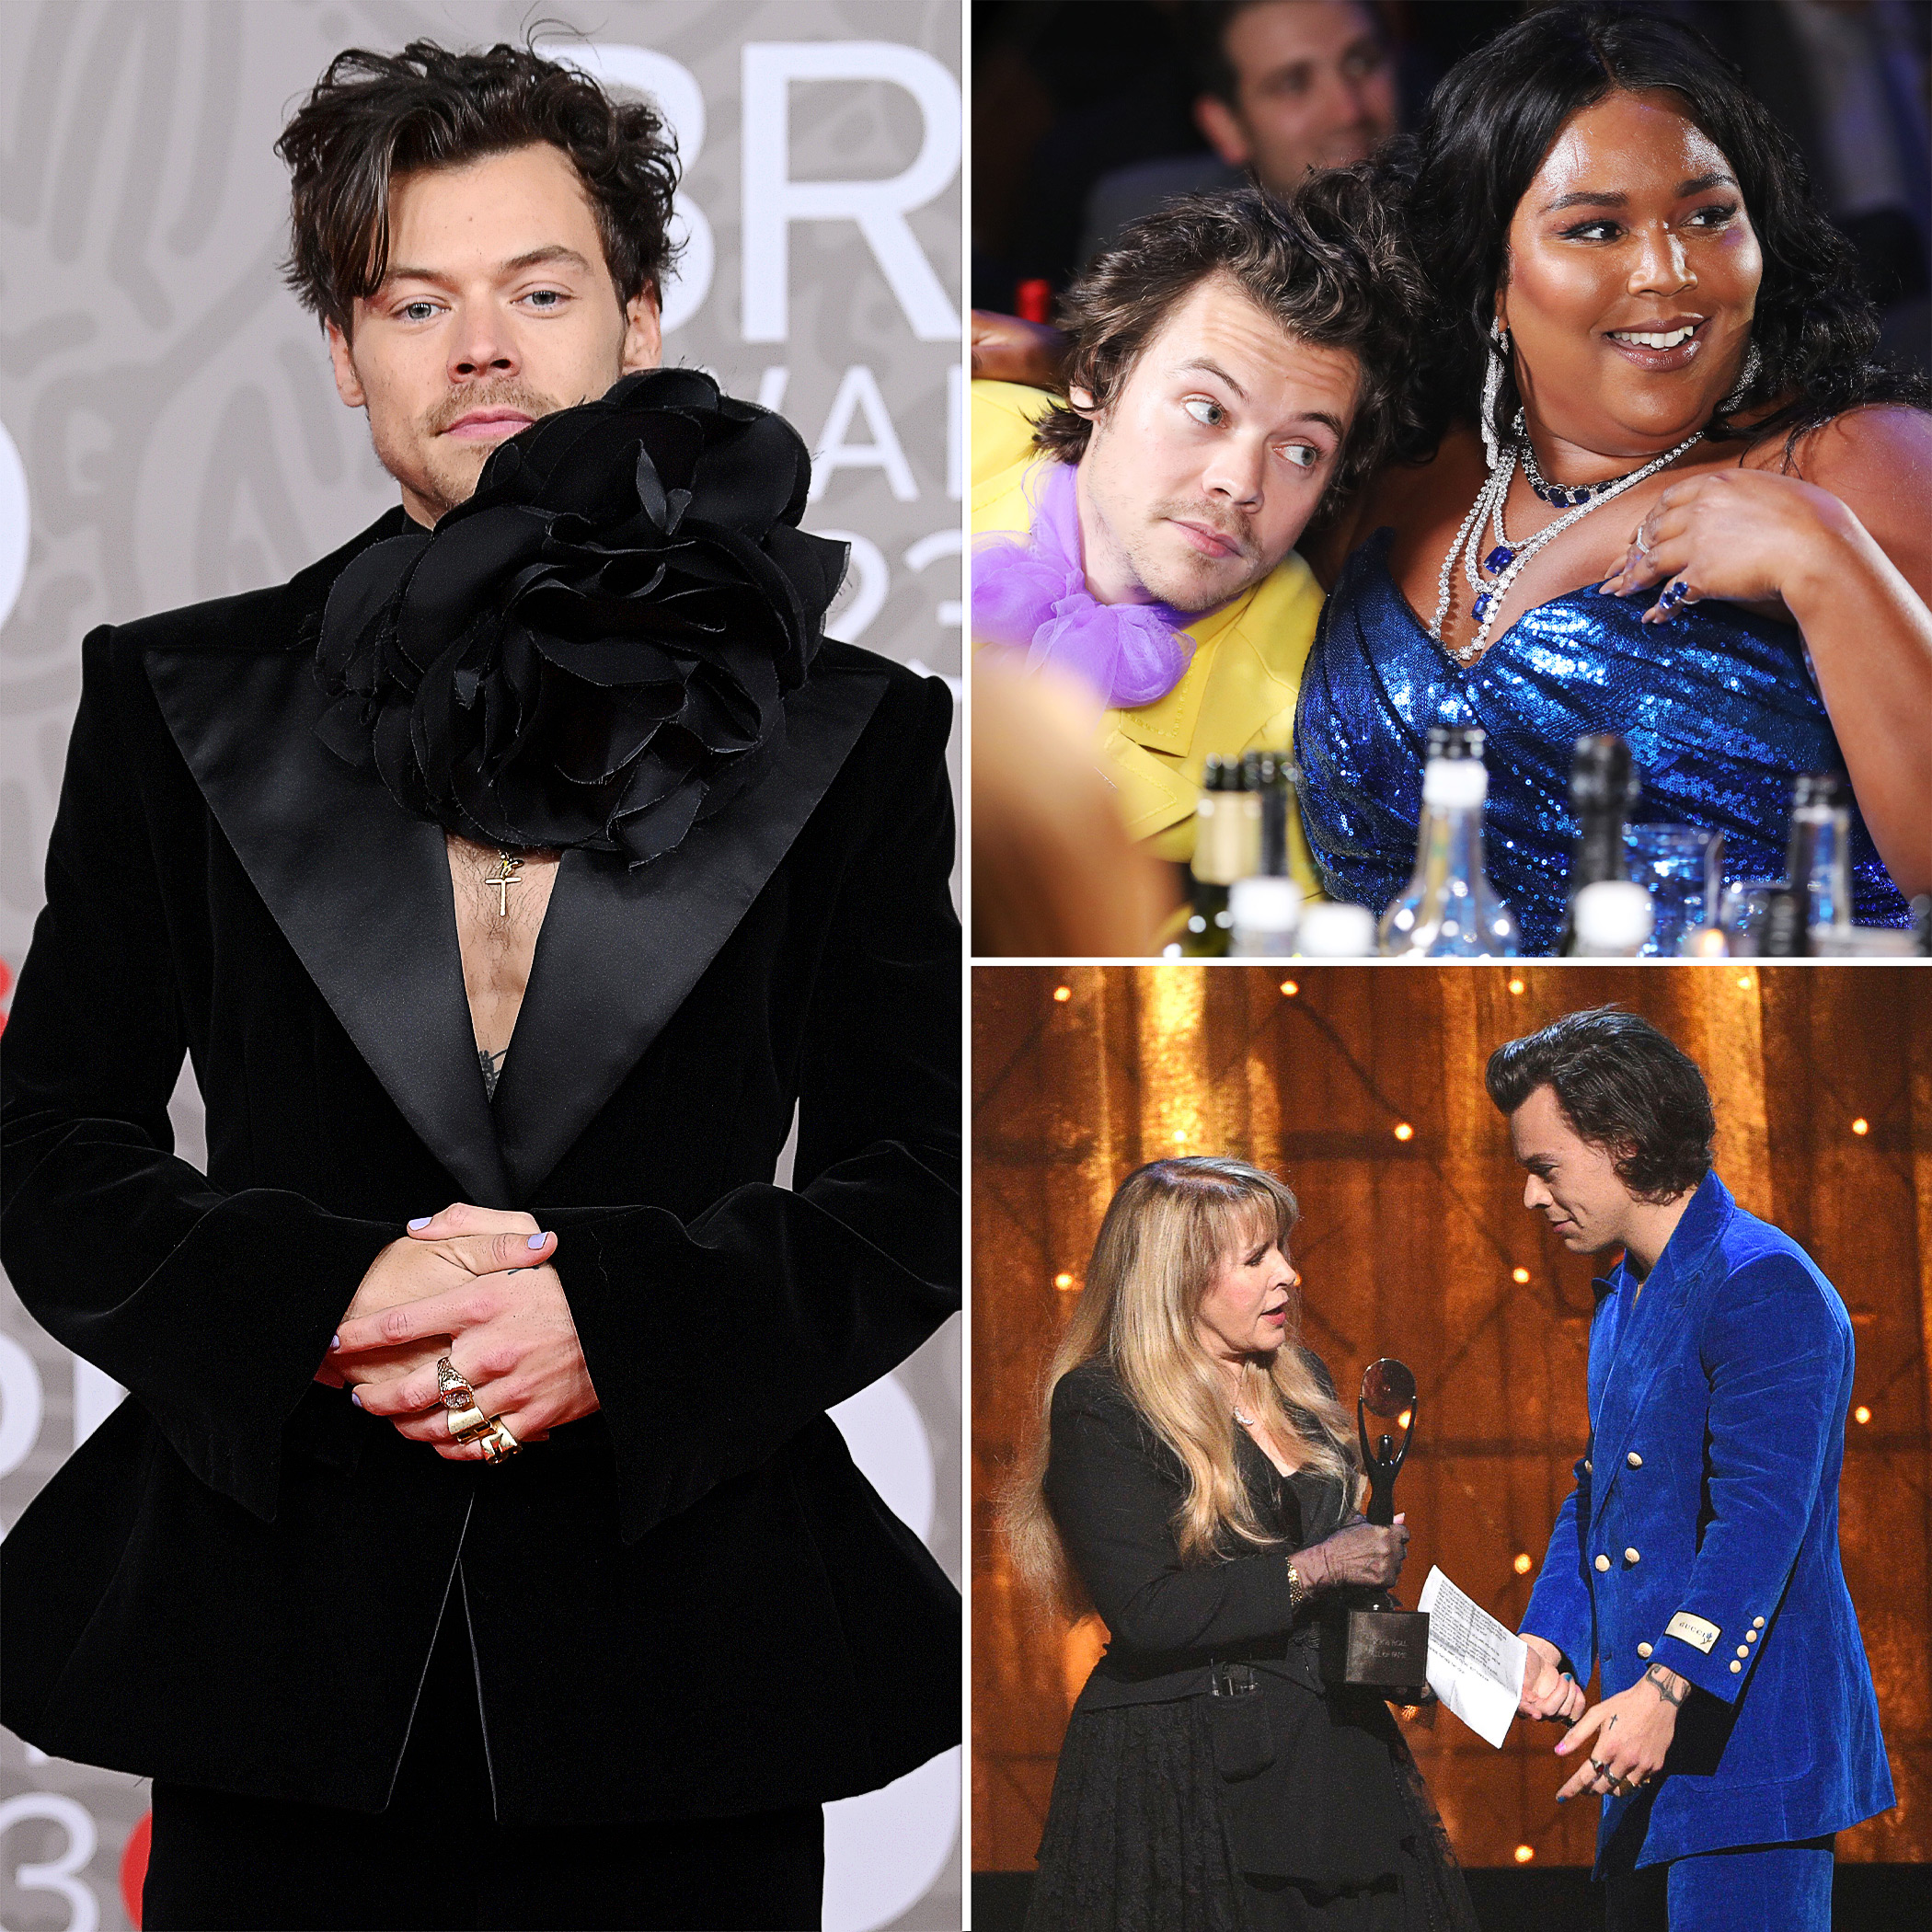 https://www.usmagazine.com/wp-content/uploads/2023/02/Harry-Styles-Inner-Circle-Stevie-Nicks-Lizzo-and-More-Famous-Friends-074.jpg?quality=86&strip=all